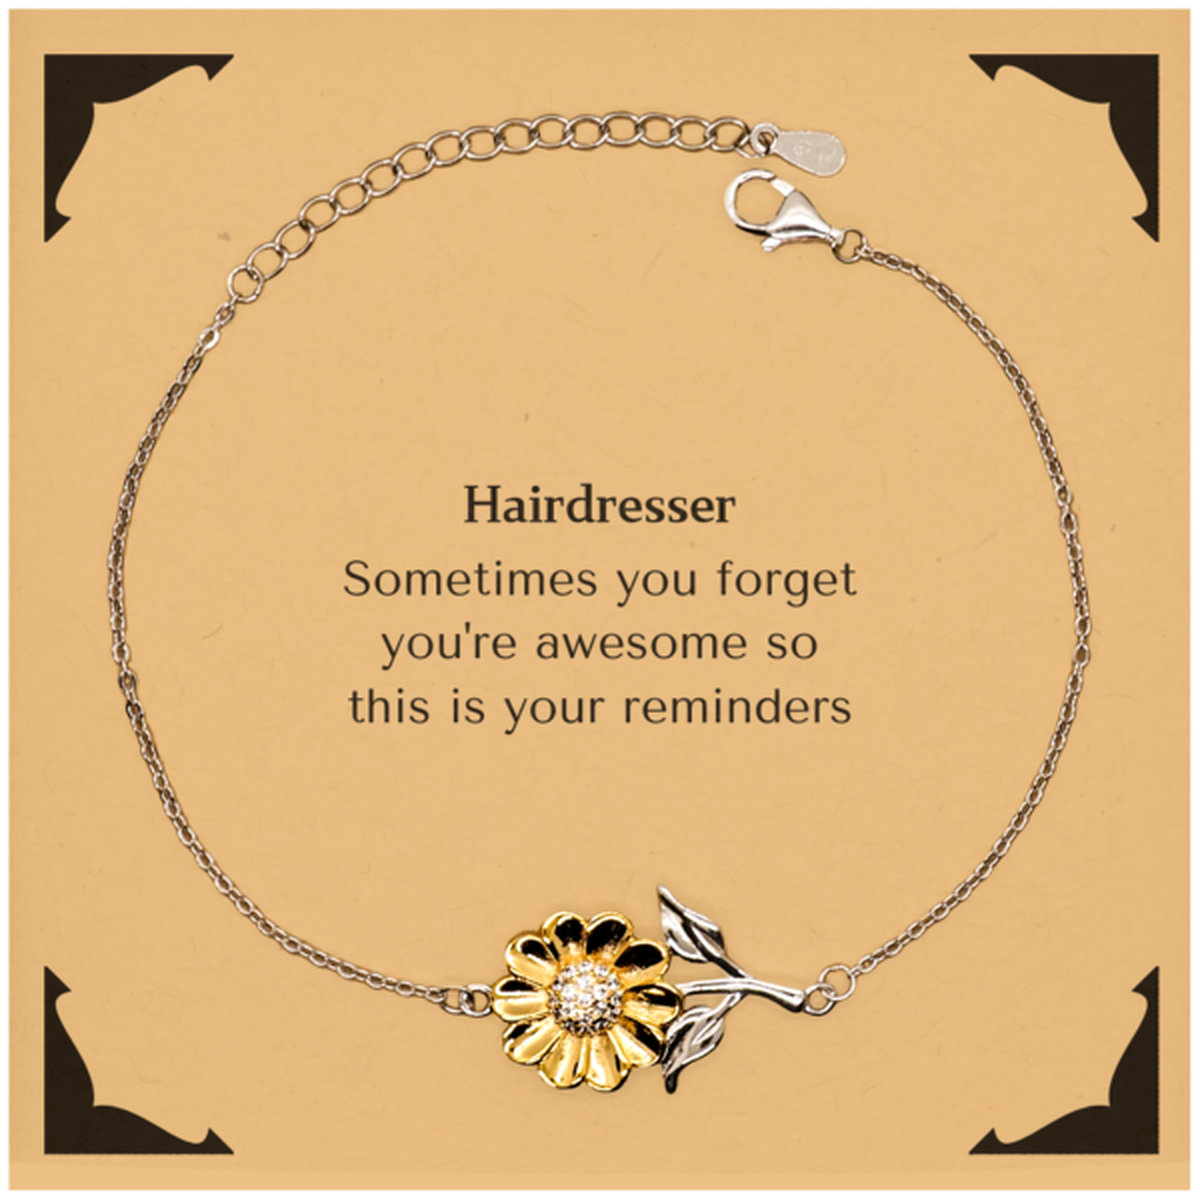 Sentimental Hairdresser Sunflower Bracelet, Hairdresser Sometimes you forget you're awesome so this is your reminders, Graduation Christmas Birthday Gifts for Hairdresser, Men, Women, Coworkers